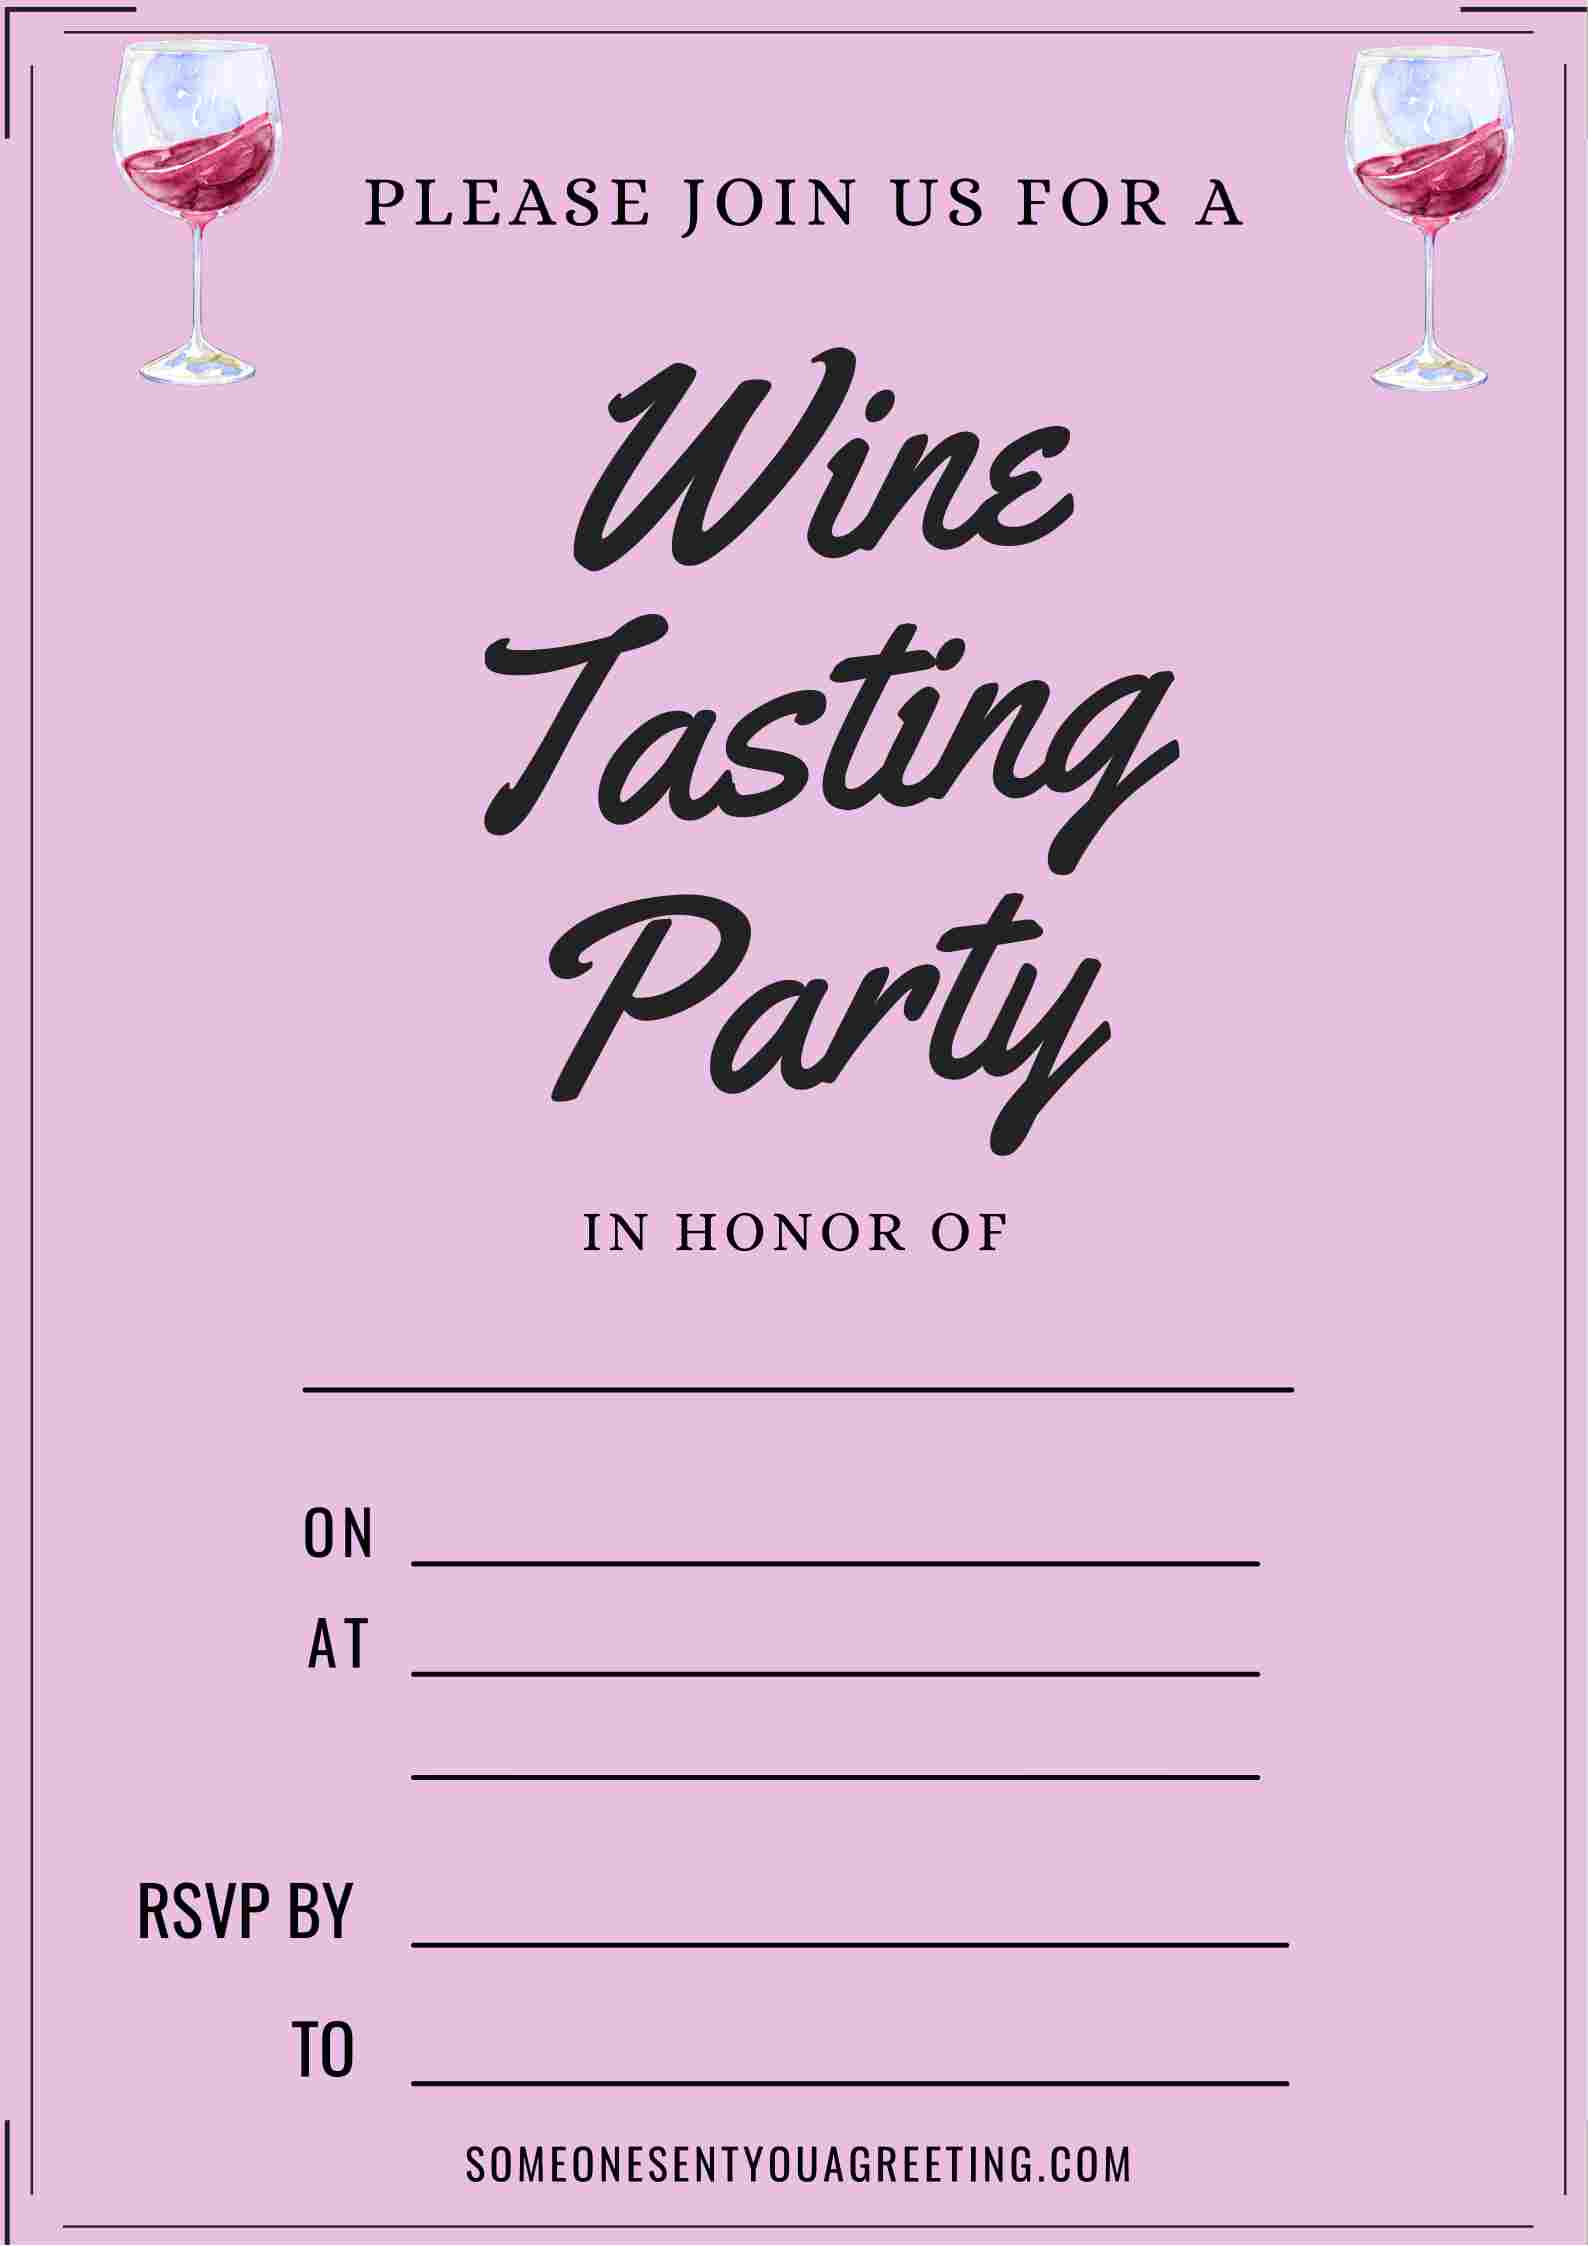 21 Wine Tasting Invitation Wording Examples - Someone Sent You A Greeting